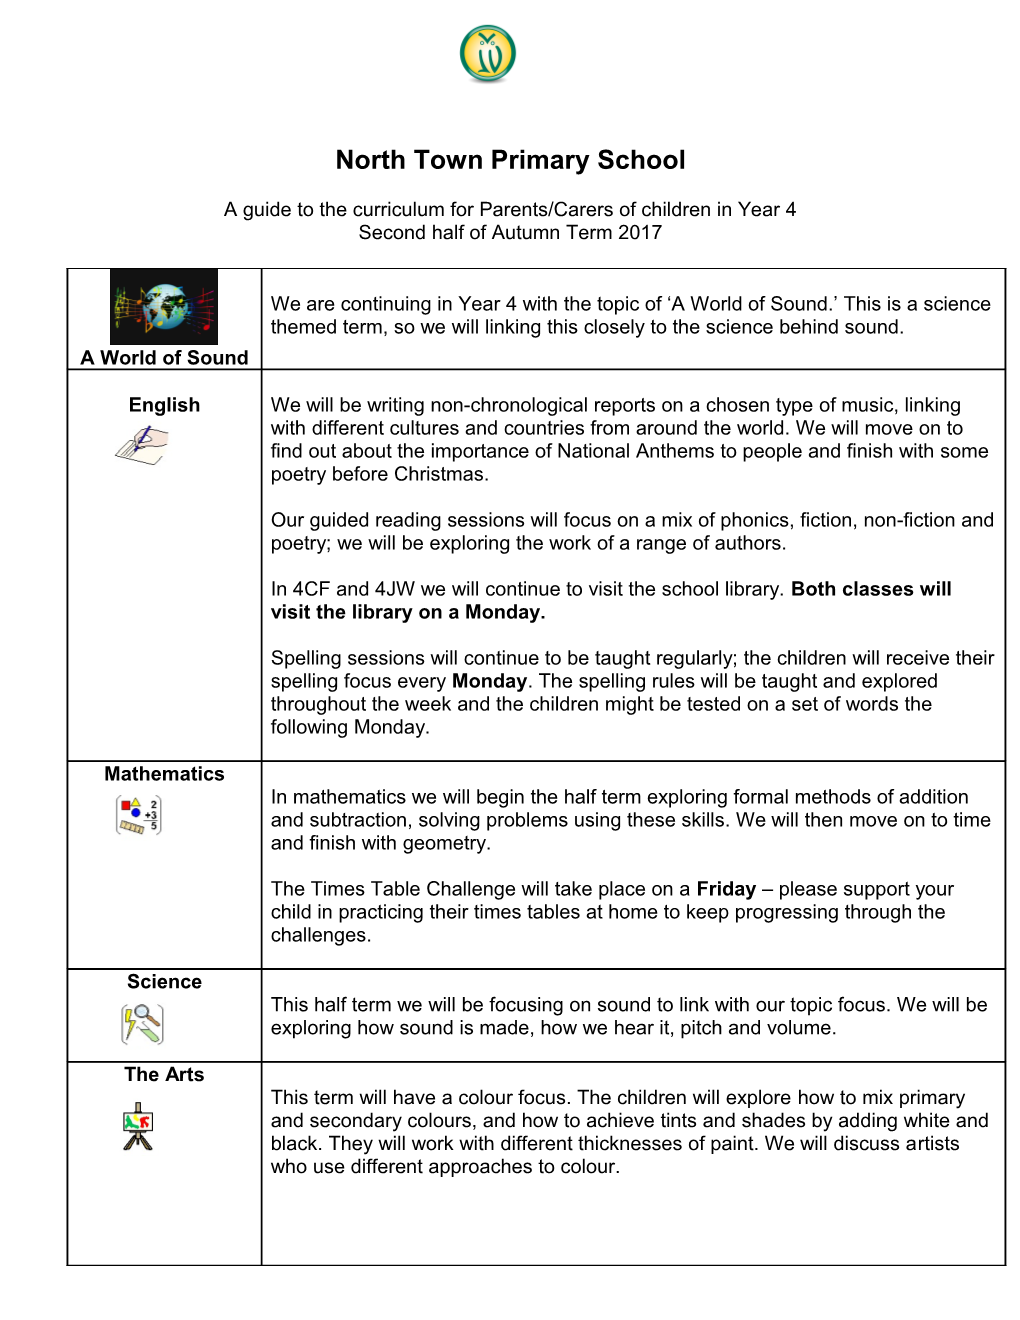 North Town Primary School s1